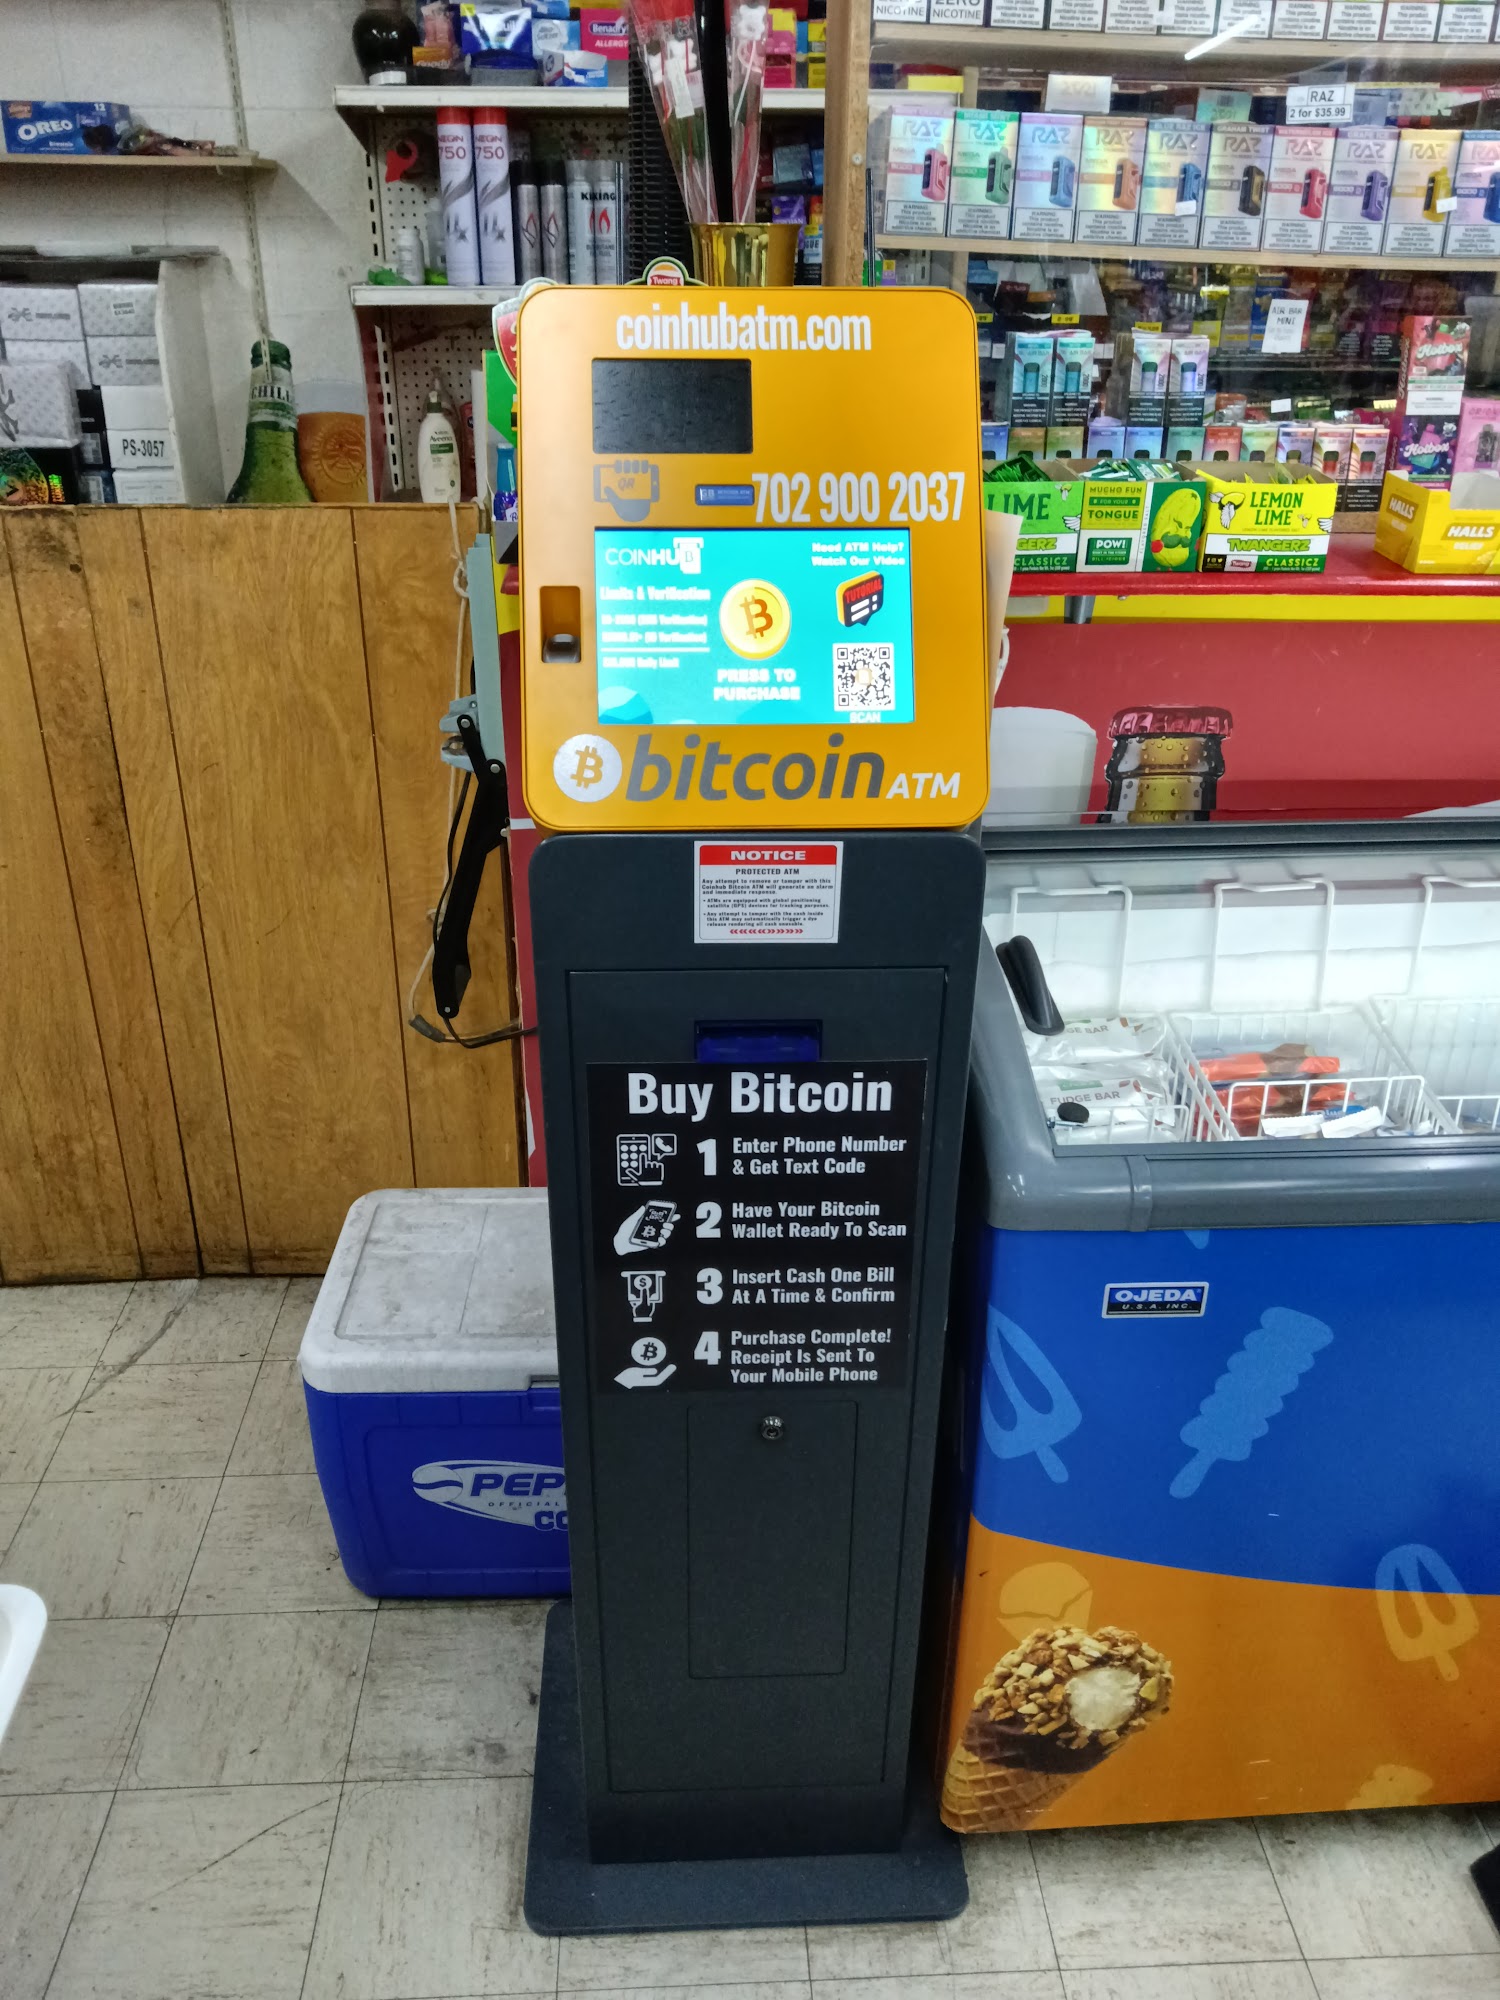 Bitcoin ATM Midwest City - Coinhub